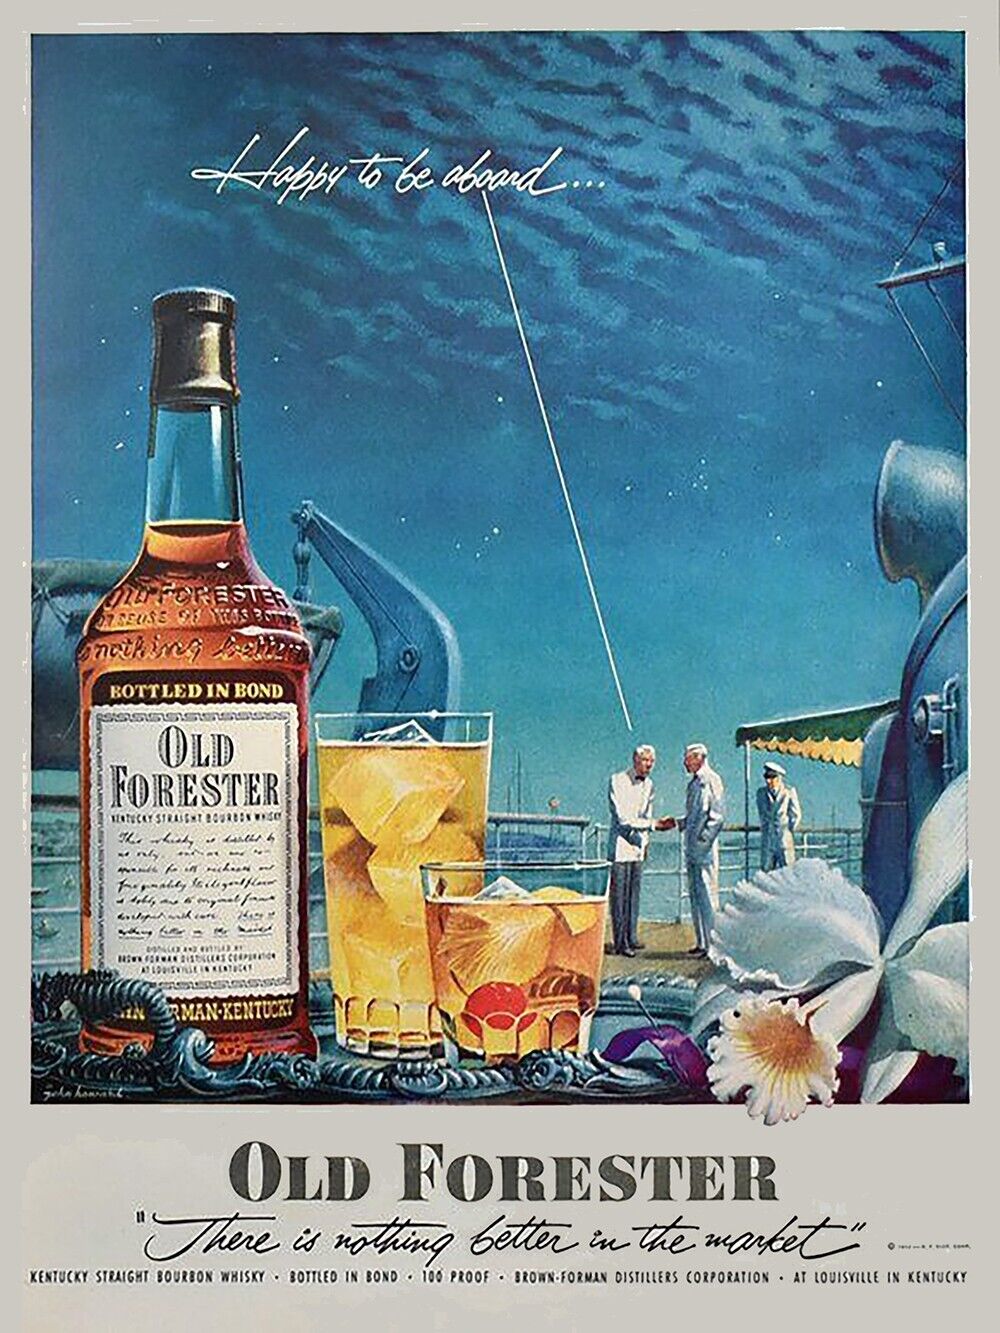 Old Forester whiskey vintage ad print, illustrated by John C Howard.